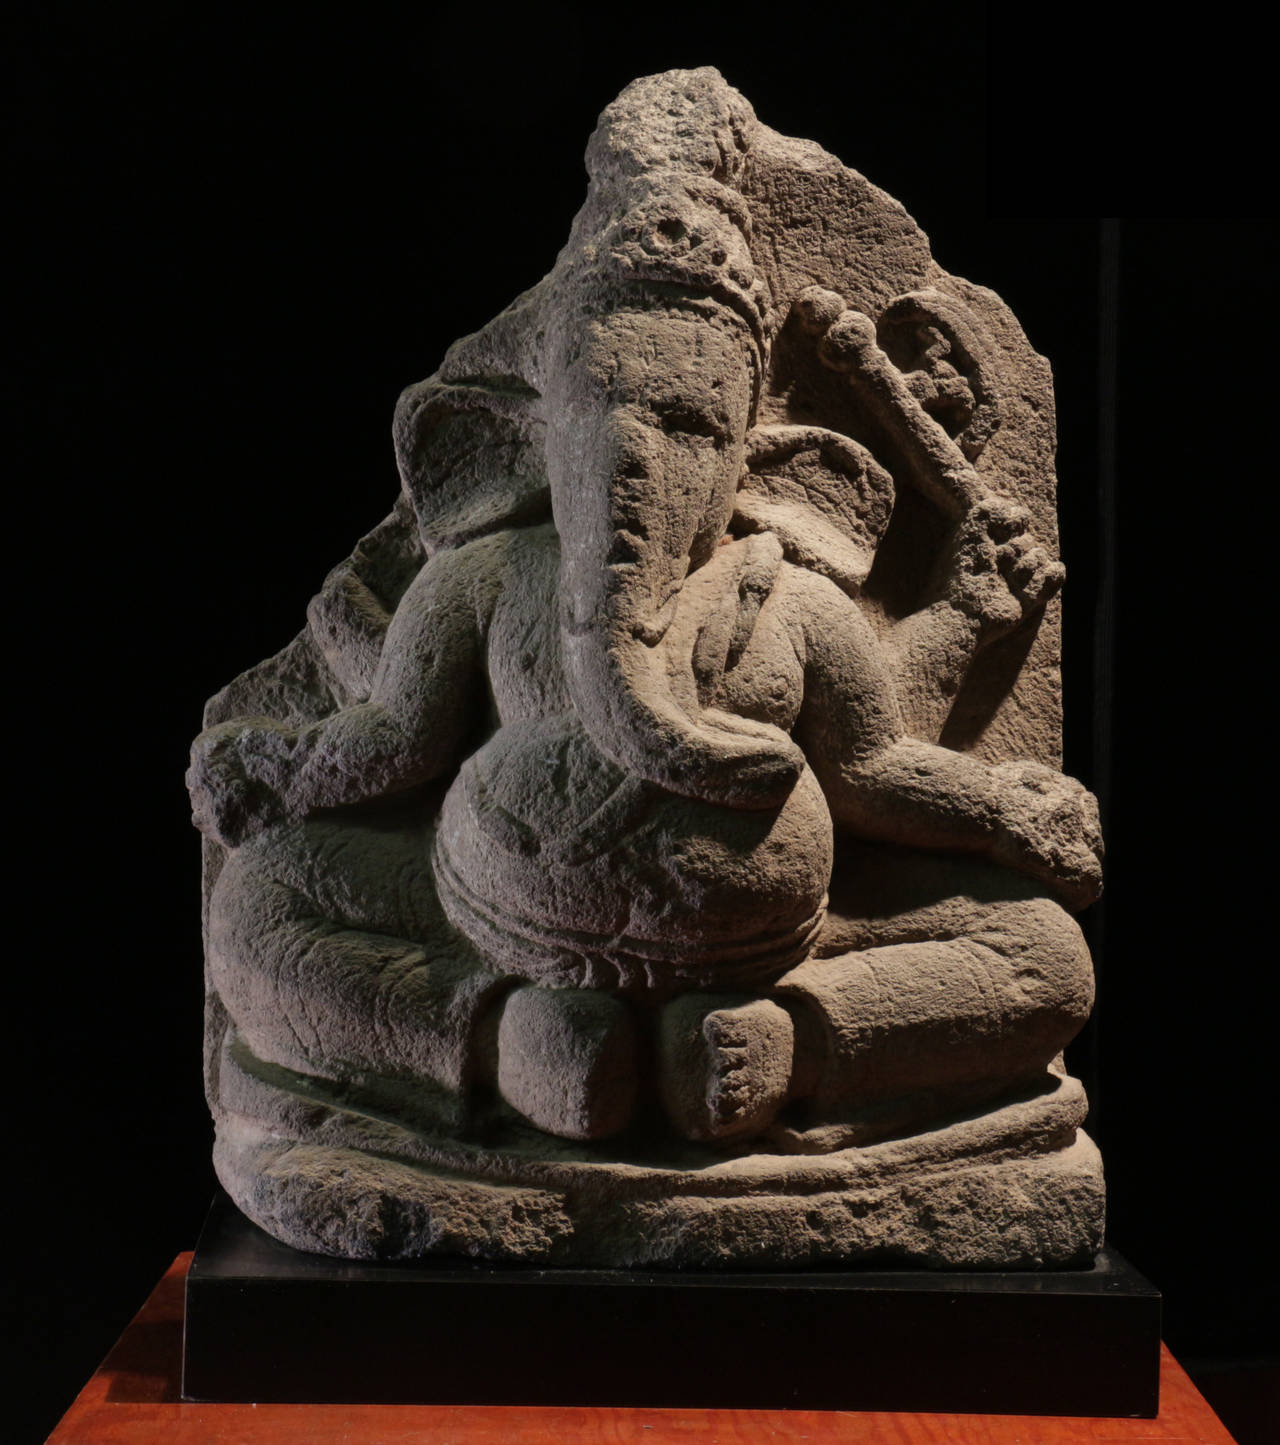 11th Century Ganesh from Java is carved from Volcanic Stone. 

The lotus petal on the rear of the sculpture indicates that this piece was once part of a larger series of sculptures arranged to form a full lotus flower possibly at the base of a